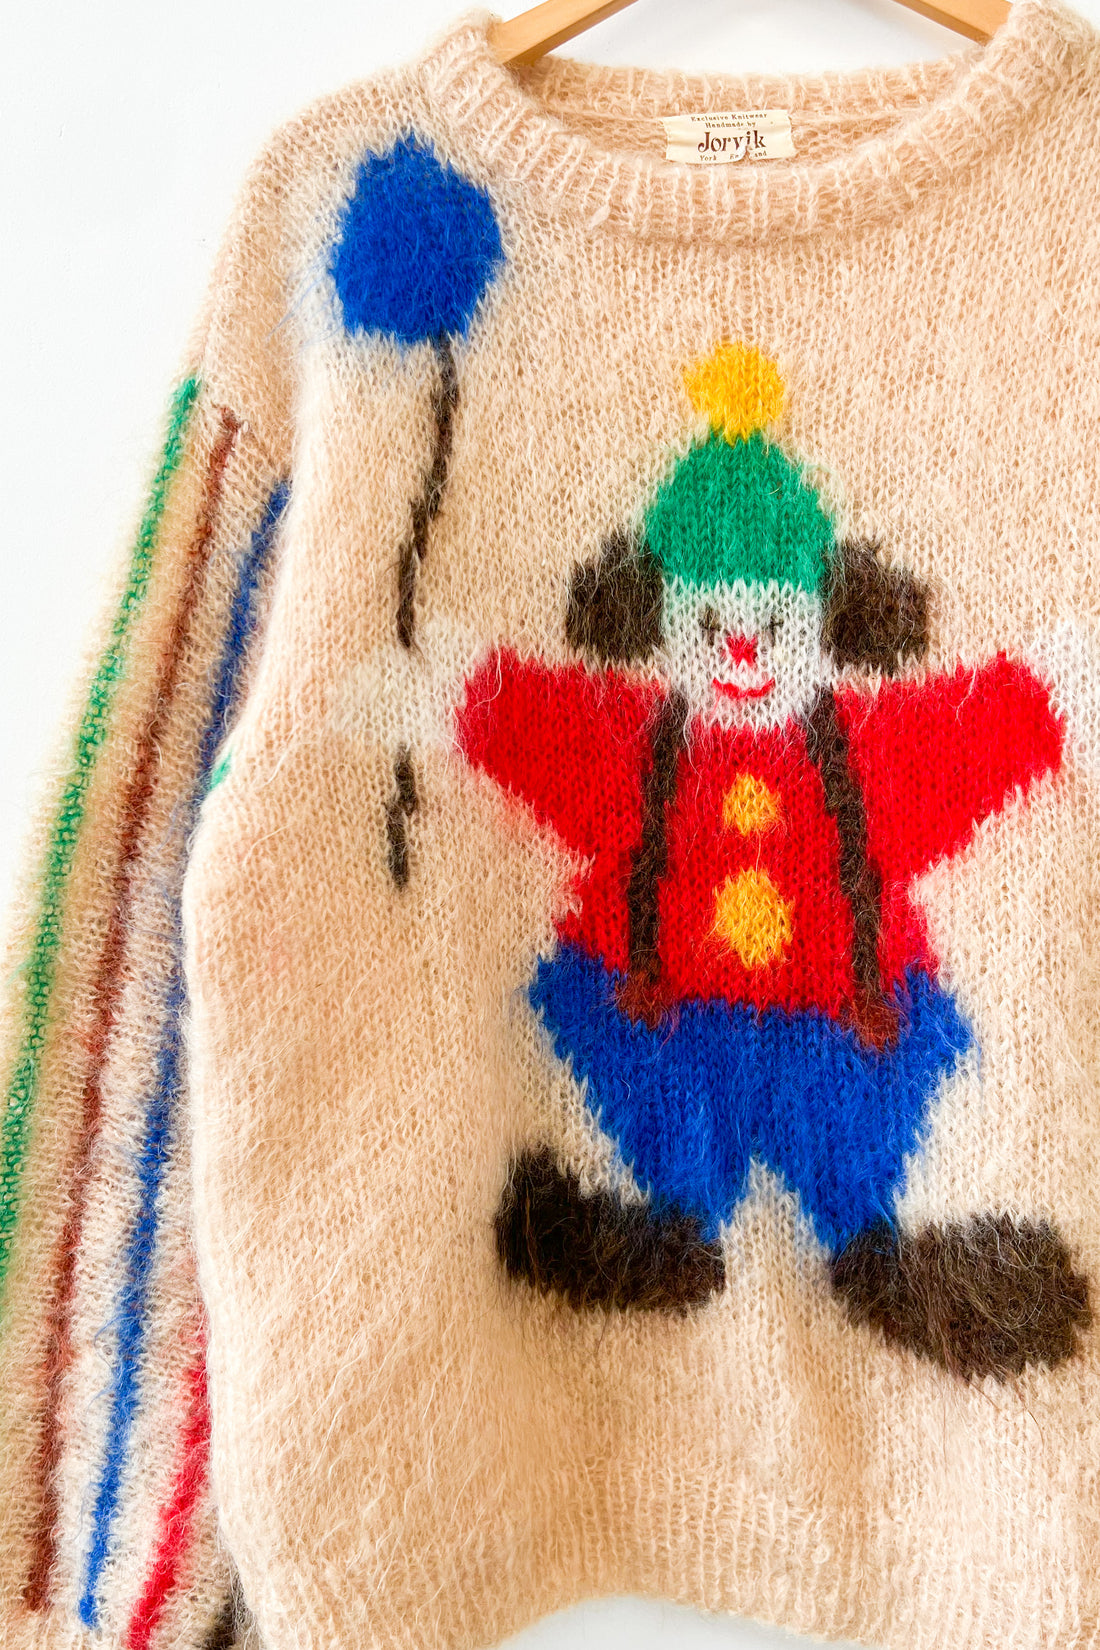 Vintage Clown Hand Knitted Mohair Jumper